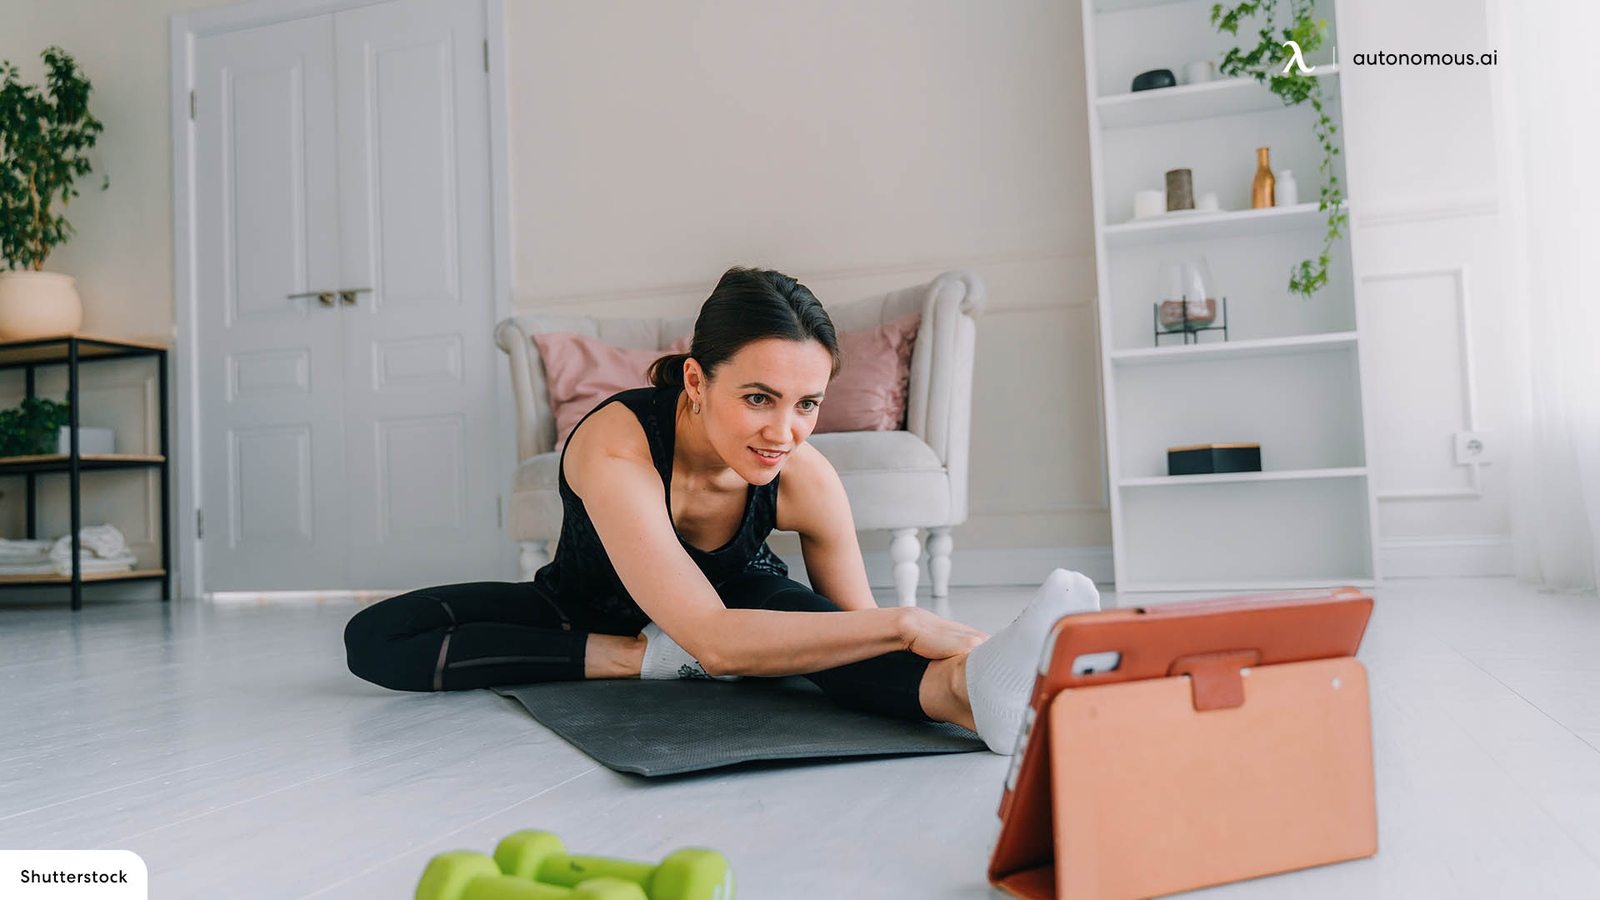 10 Simple Work from Home Wellness Ideas